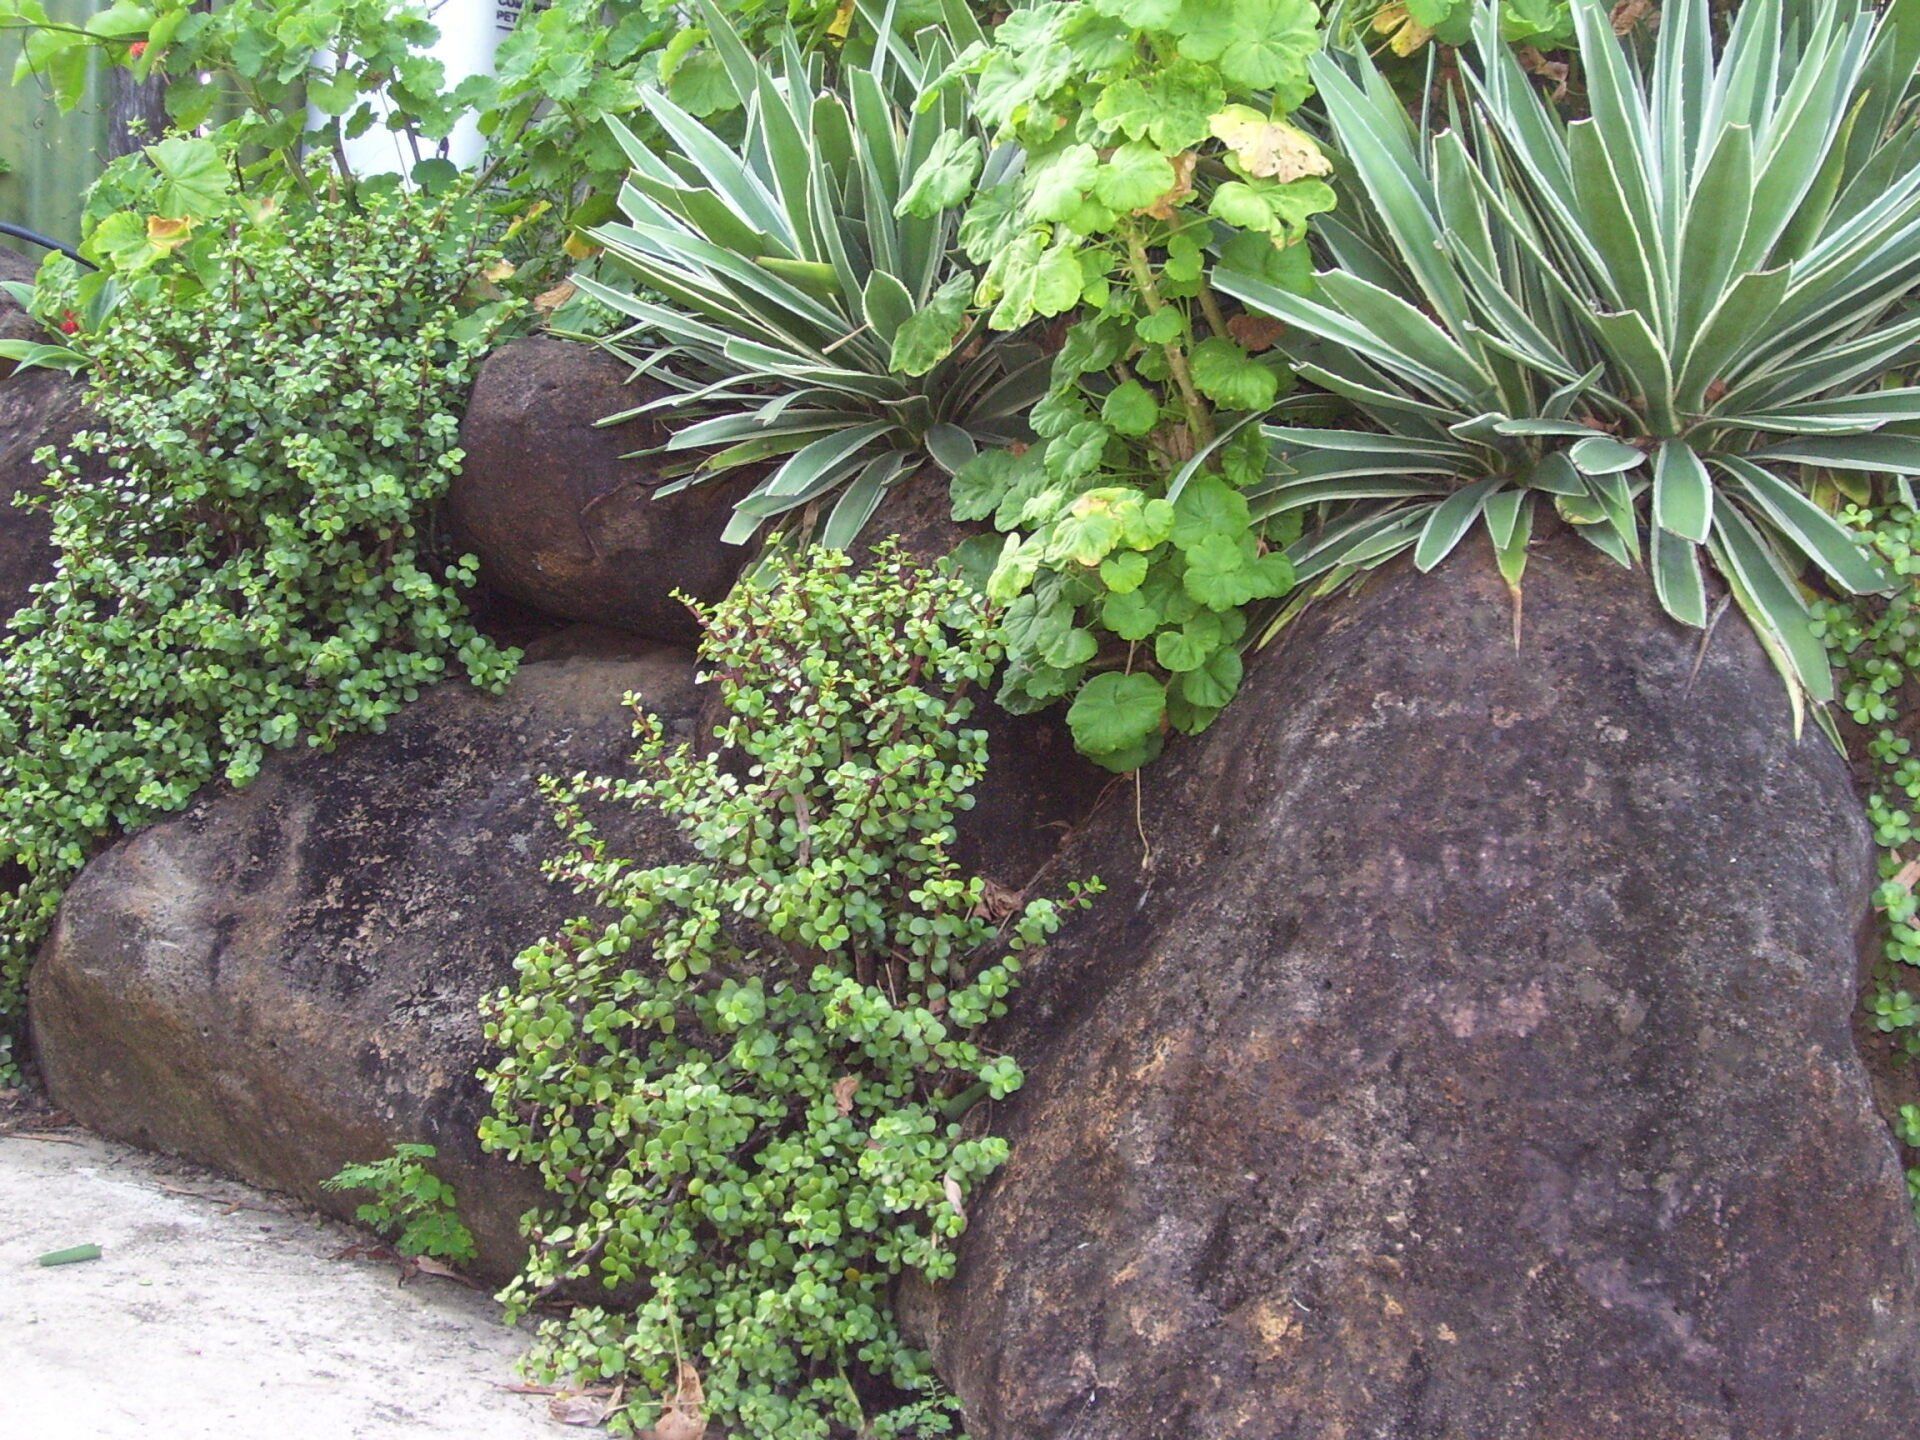 Rock Surround by Plants — A1 Rock This City Truck & Dog Hire In Good Night QLD